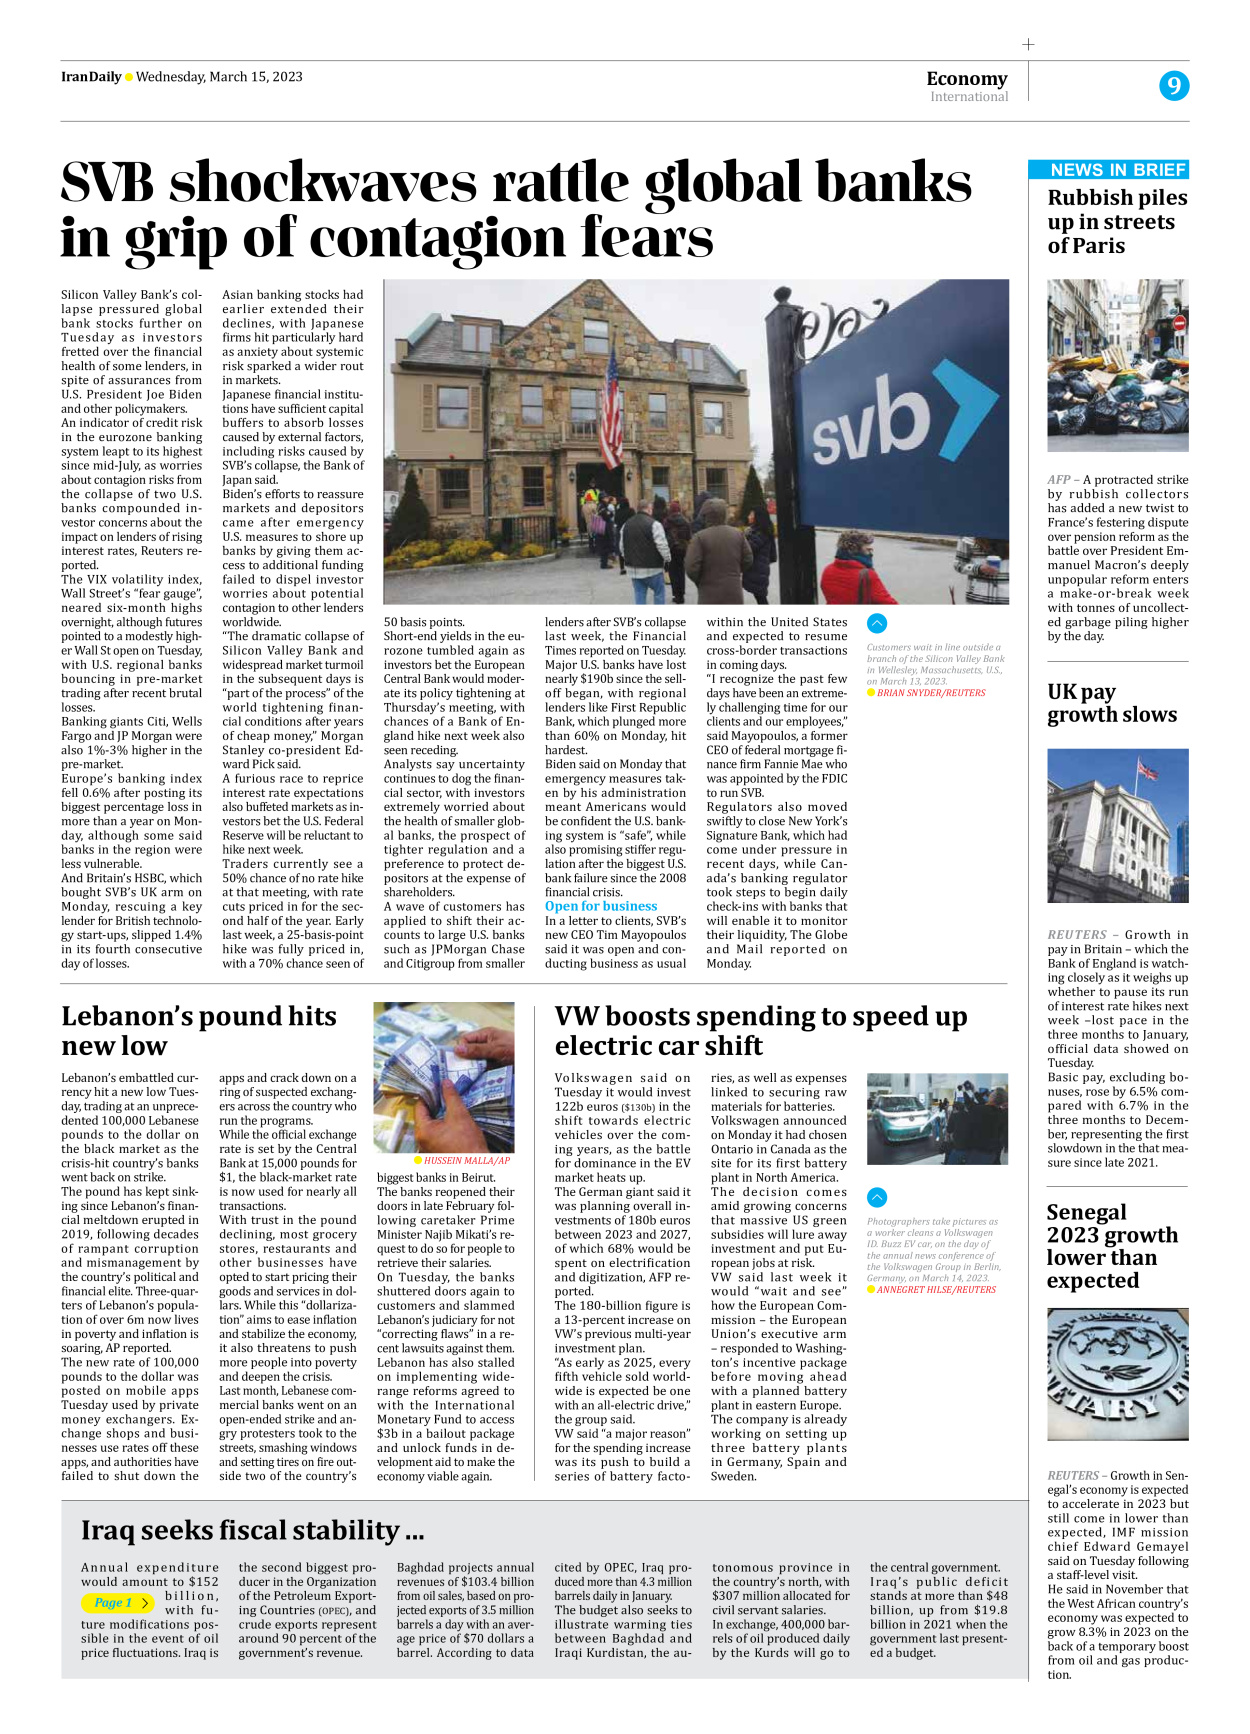 Iran Daily - Number Seven Thousand Two Hundred and Fifty Eight - 15 March 2023 - Page 9